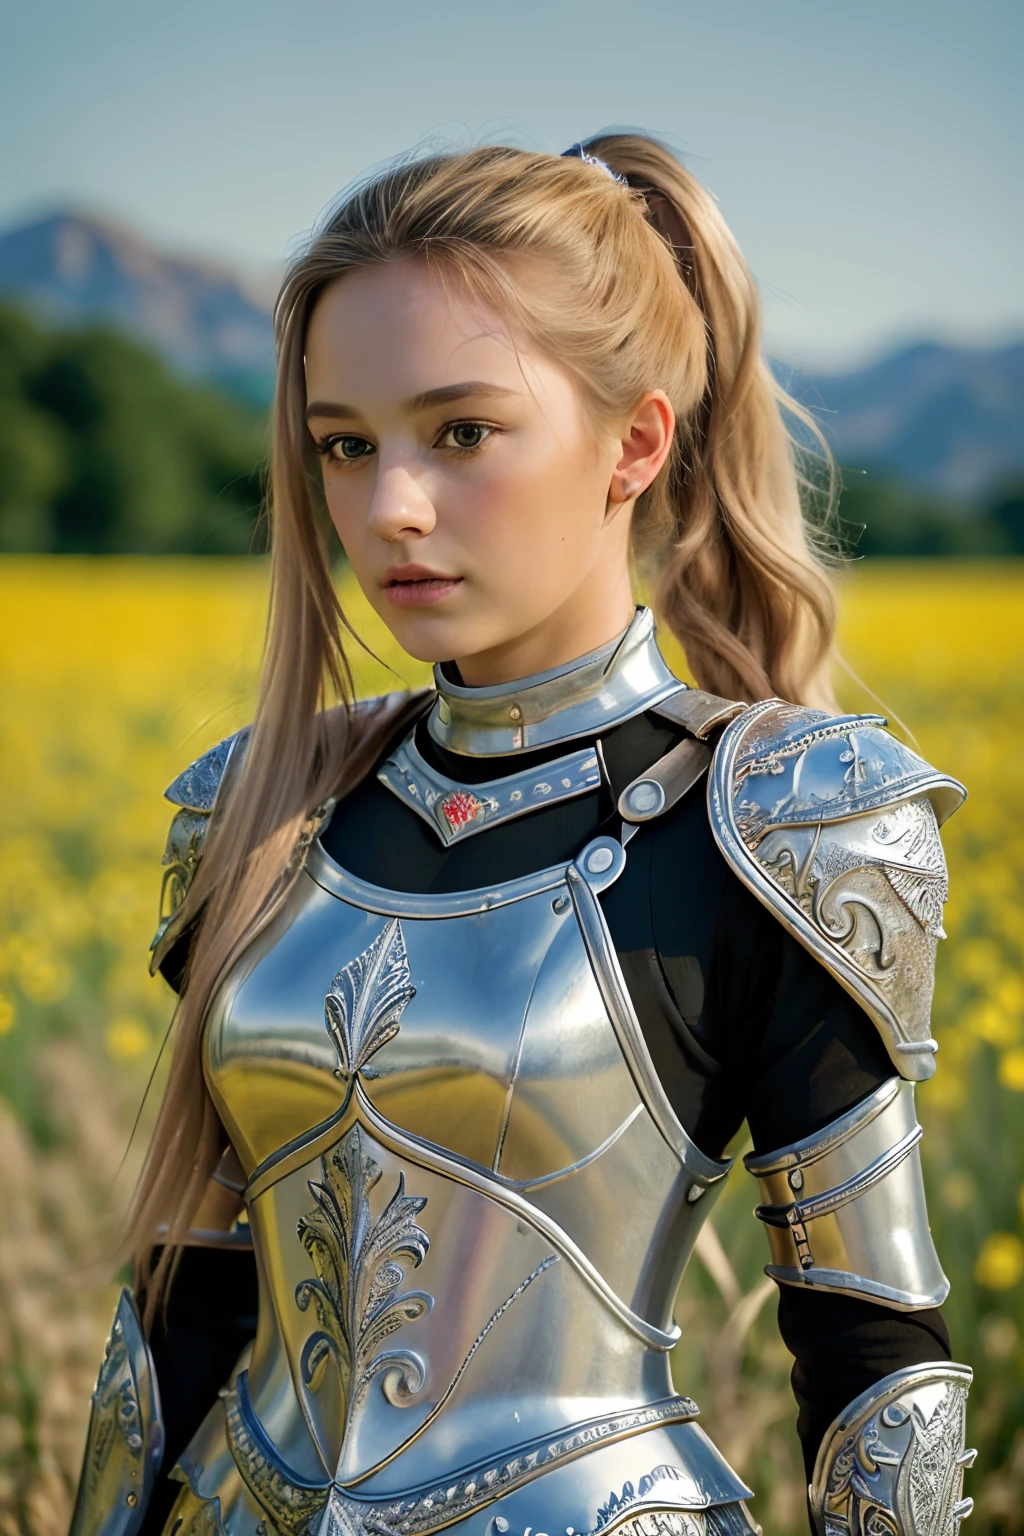 (8K, best quality:1.2), (masterpiece:1.37), (photo, photorealistic:1.37), (ultrahigh-res), full body, walking pose, shot from front, slow motion, 21 year old teen wearing the full body, (light silver armour:1.2),(ornately decorated armor), (insanely detailed, bloom:1.5), (highest quality, Alessandro Casagrande, Greg Rutkowski, Sally Mann, concept art, 4k), (analog:1.2), (high sharpness), (detailed pupils:1.1), detailed face and eyes, Masterpiece, best quality, (highly detailed photo:1.1), (long blonde Hair, ponytail,ecstatic:1.1), (young woman:1.1), sharp, (perfect body:1.1), realistic, real shadow, 3d, (mustard field background:1.2), (by Michelangelo), photographed by Canan EOS R6, 135mm, 1/1250s, f/2.8, ISO 400